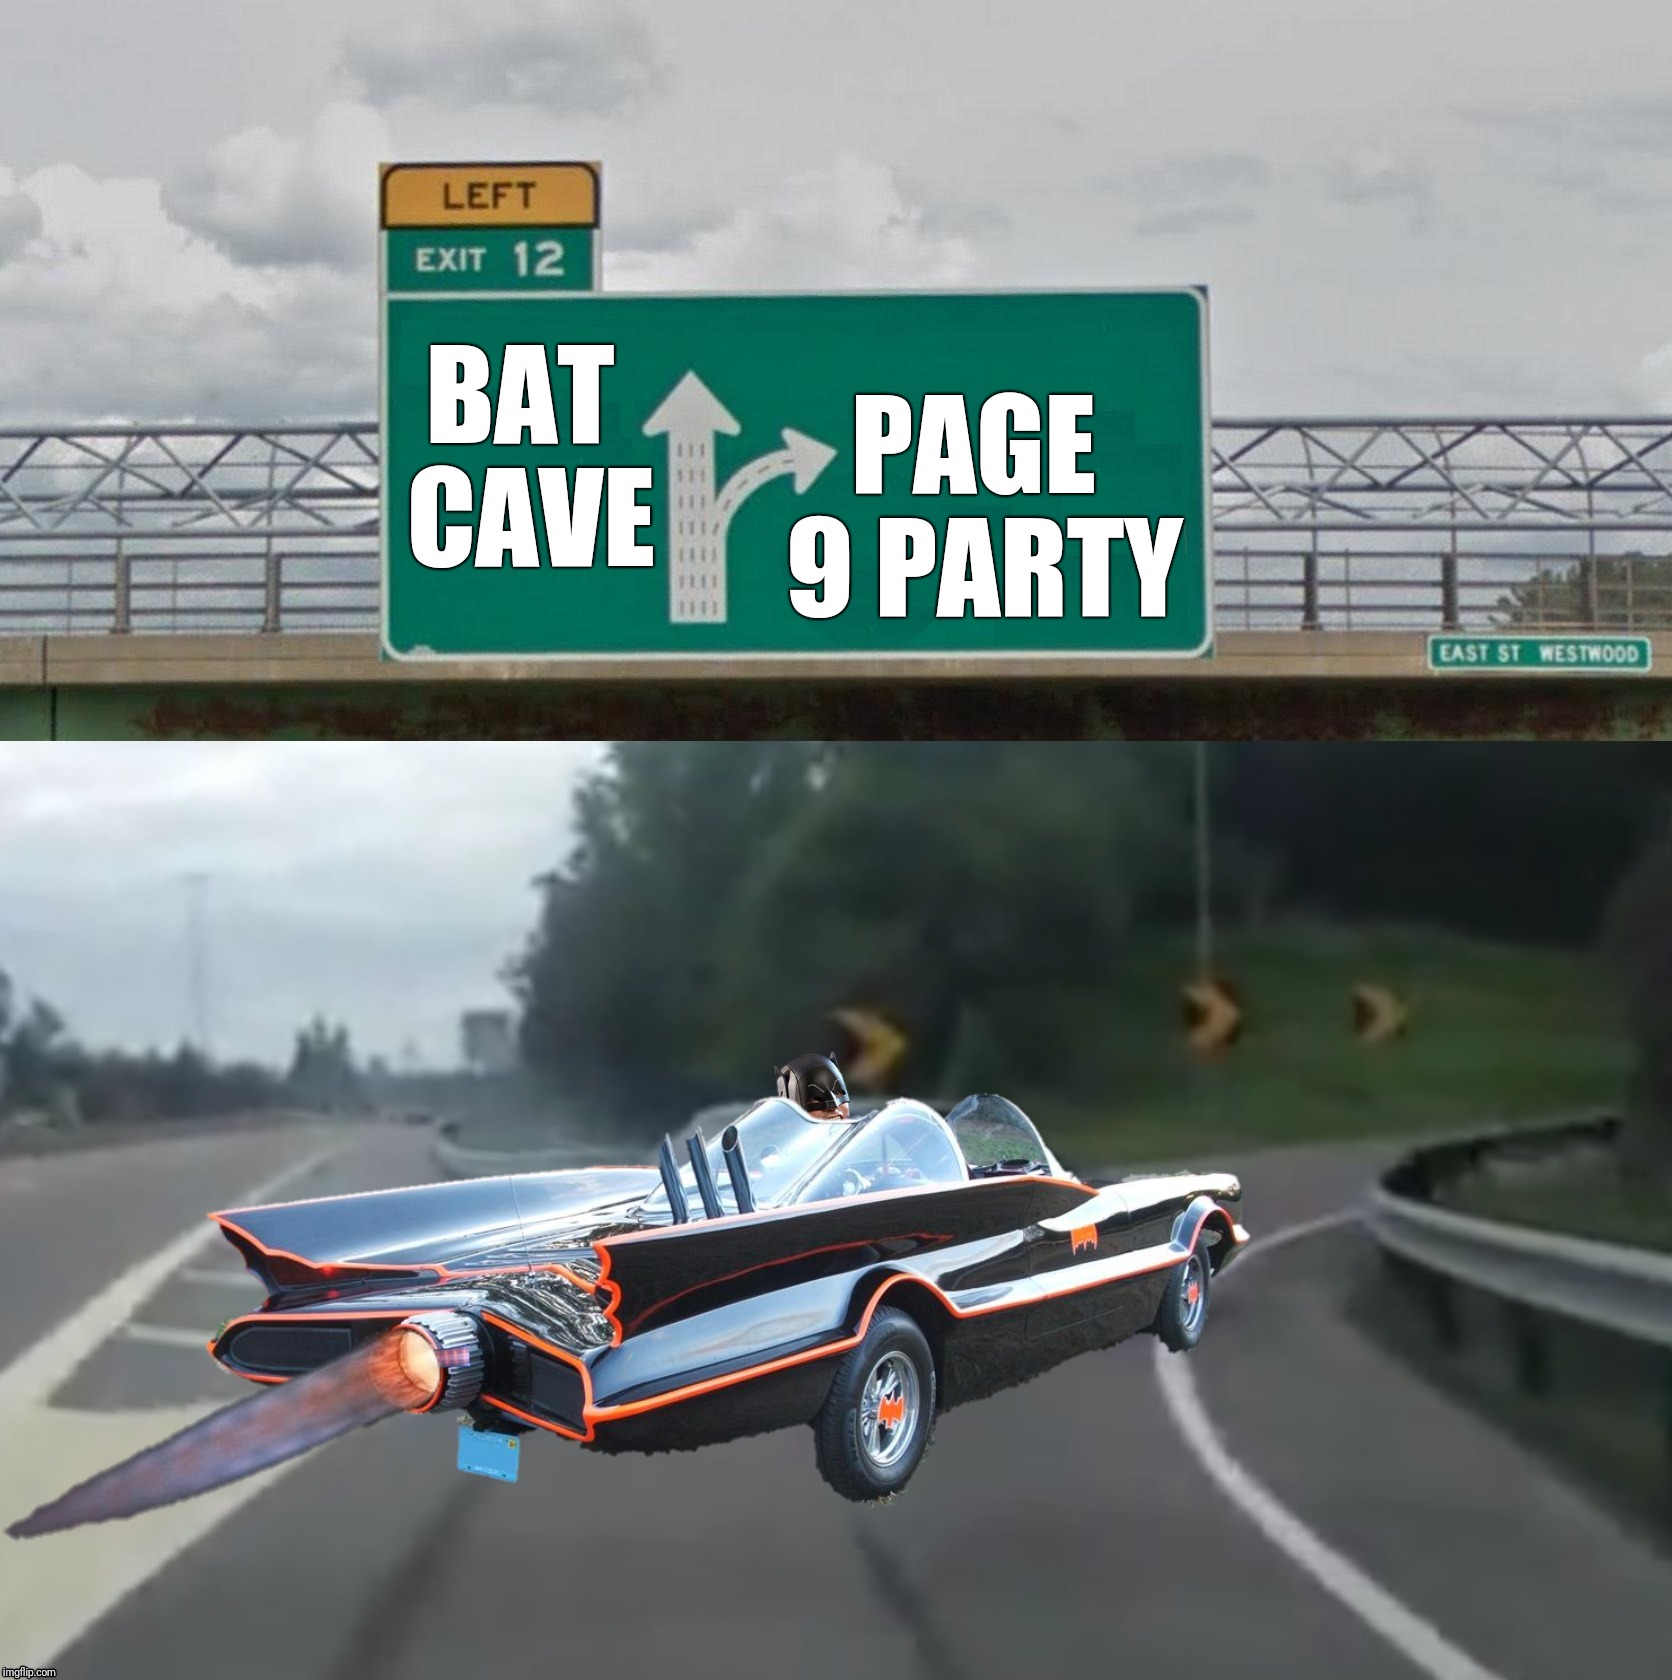 Join the fun, Page 9 Party on Monday March 19th at 9pm Eastern Time. | BAT CAVE; PAGE 9 PARTY | image tagged in left exit 12 batmobile,page 9 party | made w/ Imgflip meme maker